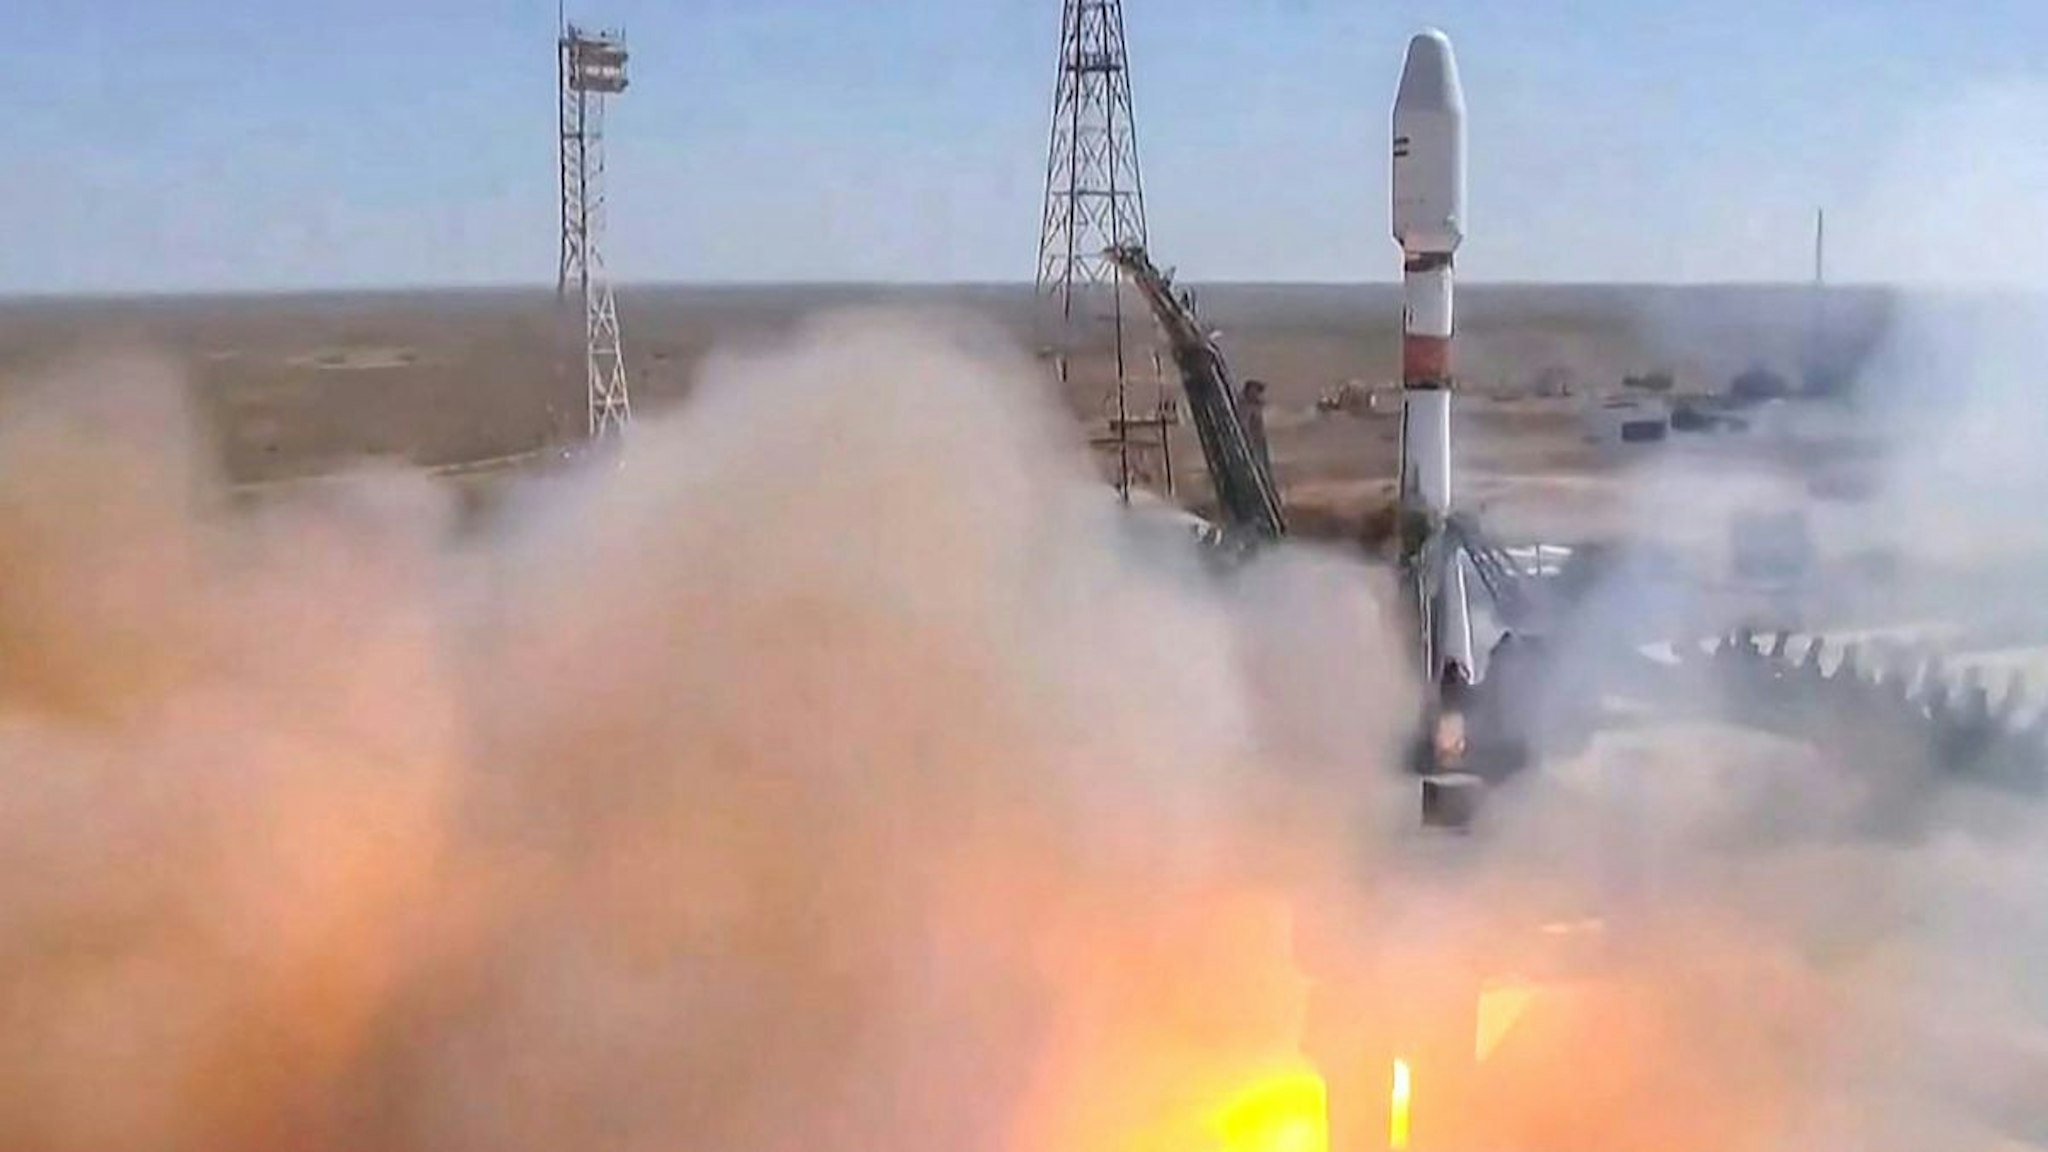 This handout video grab taken and released on August 9, 2022 by the Russian Space Agency Roscosmos shows the Soyuz-2.1b rocket carrying the Khayyam satellite blasting off from a launchpad at the Baikonur Cosmodrome.